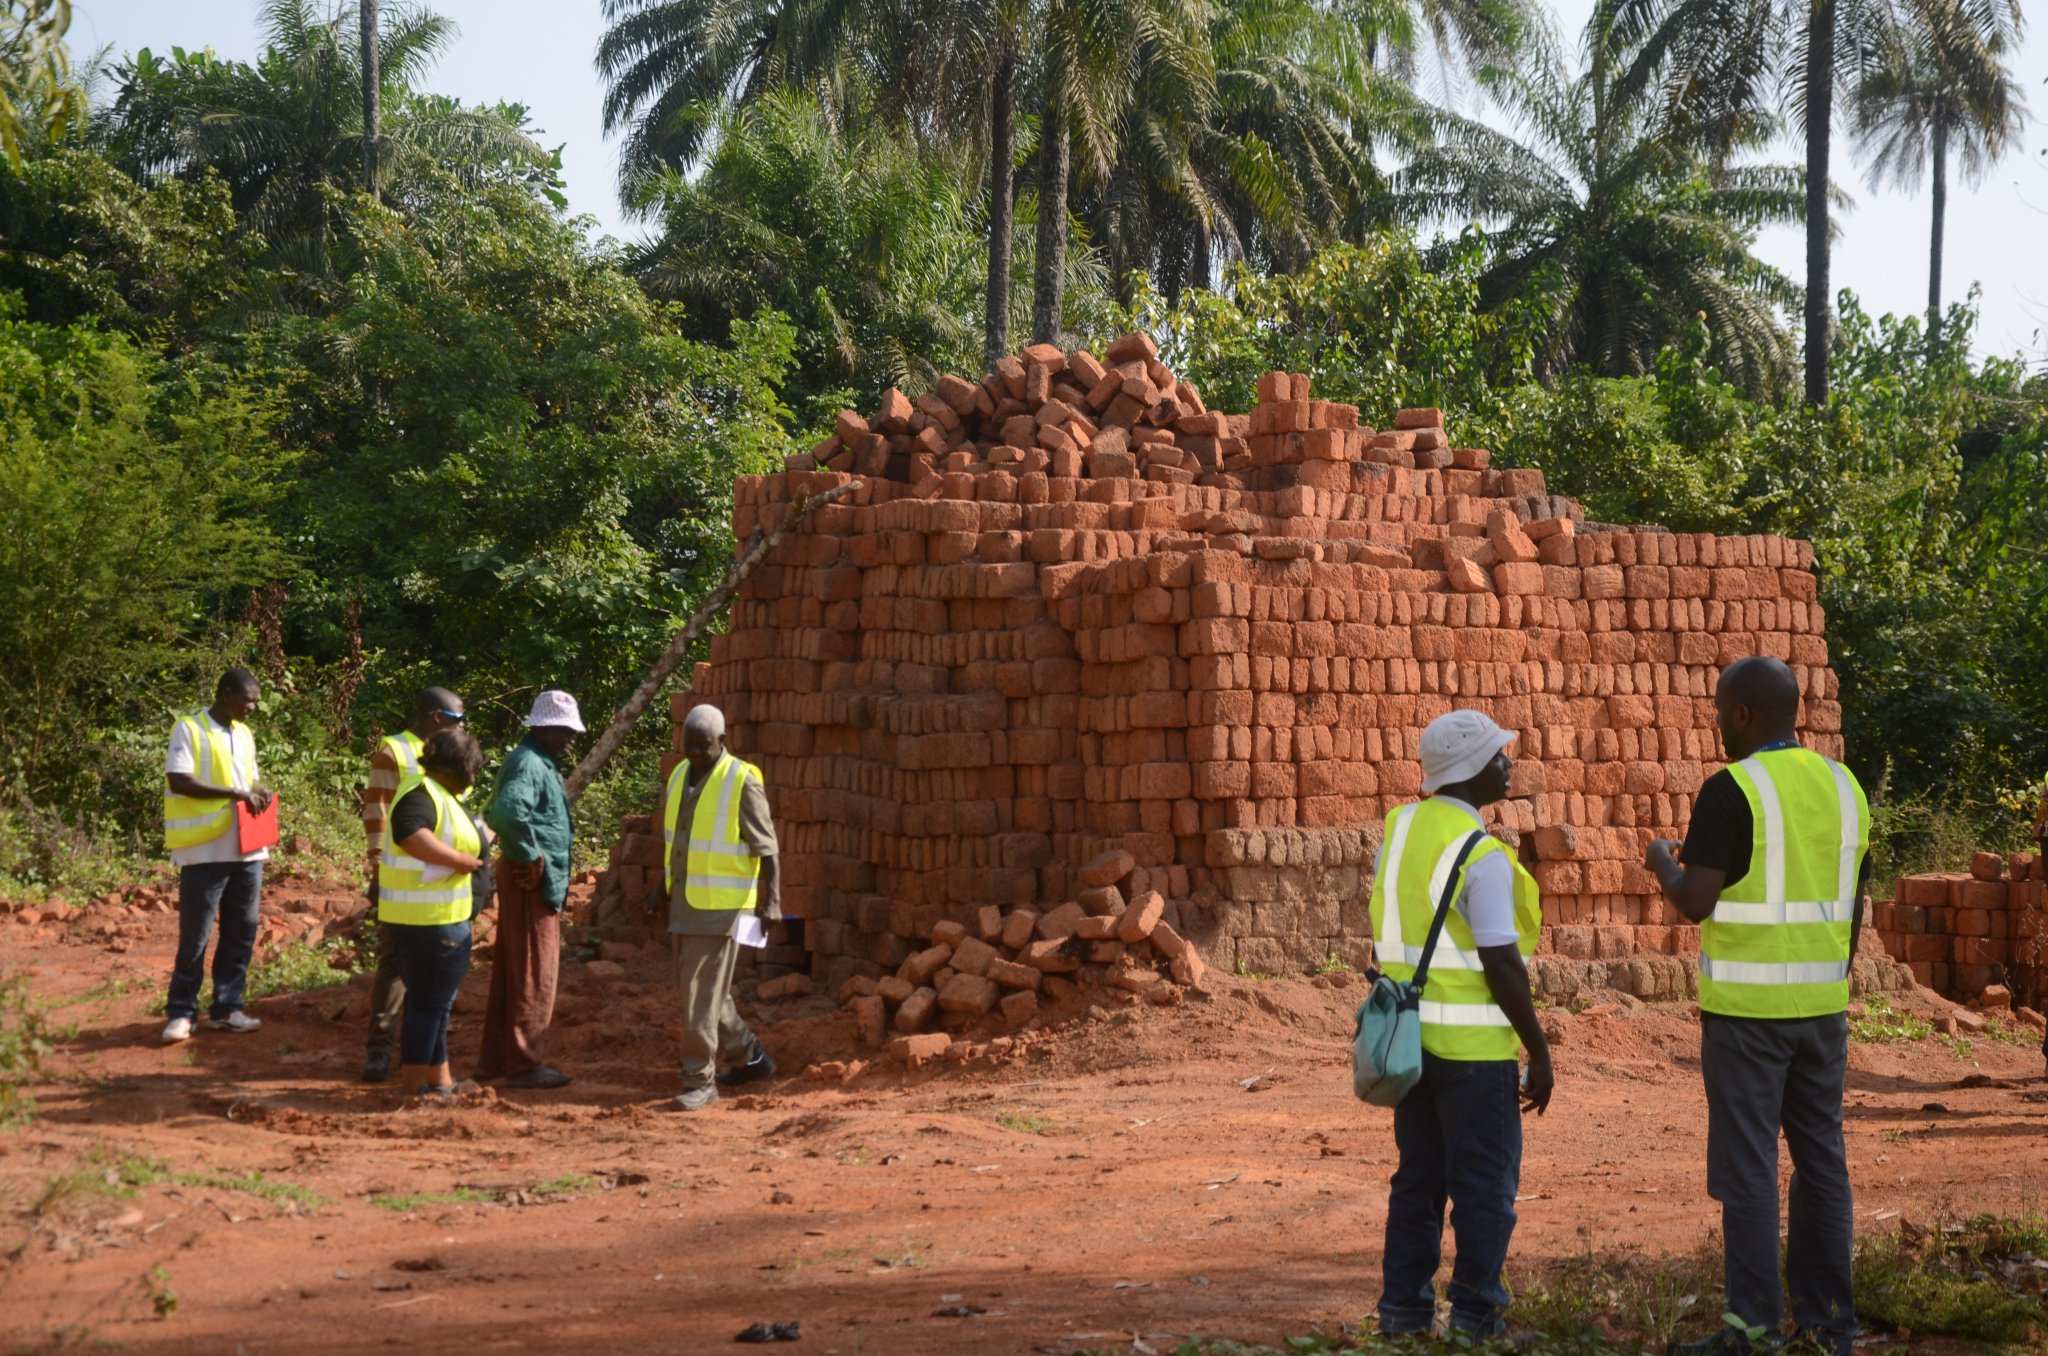 Construction materials, produced in #ASM sites, are essential for housing #SDGs. Find out more re #DevMin: https://t.co/QbiOlYyu7F #shareasm https://t.co/q4y5PaeKKK